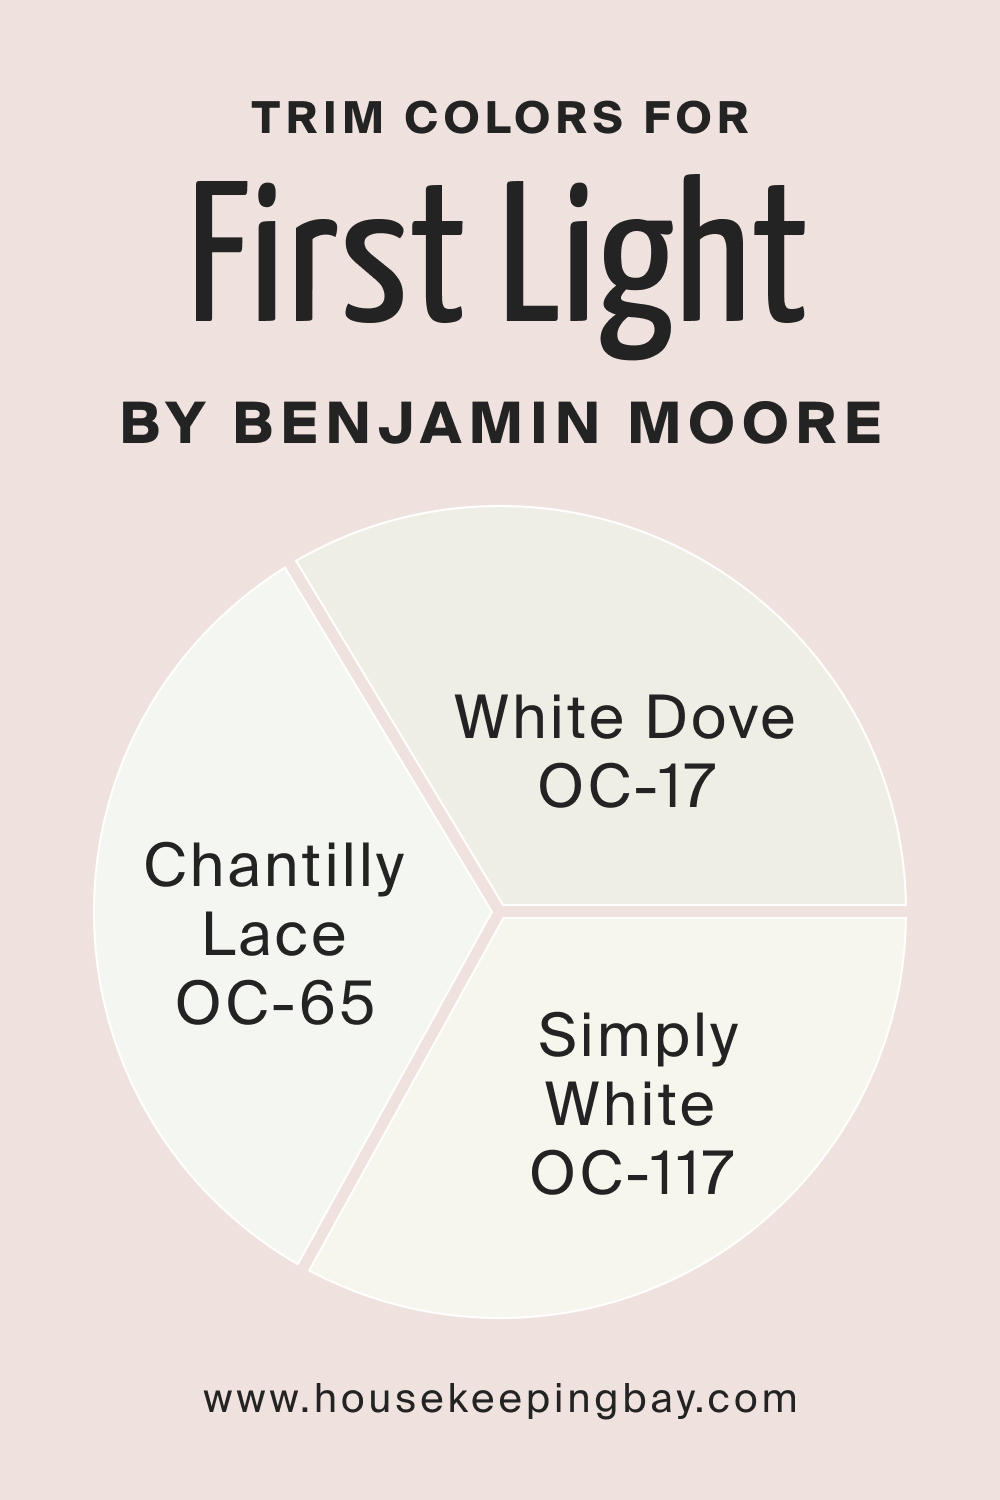 Trim Colors for First Light 2102 70 by Benjamin Moore